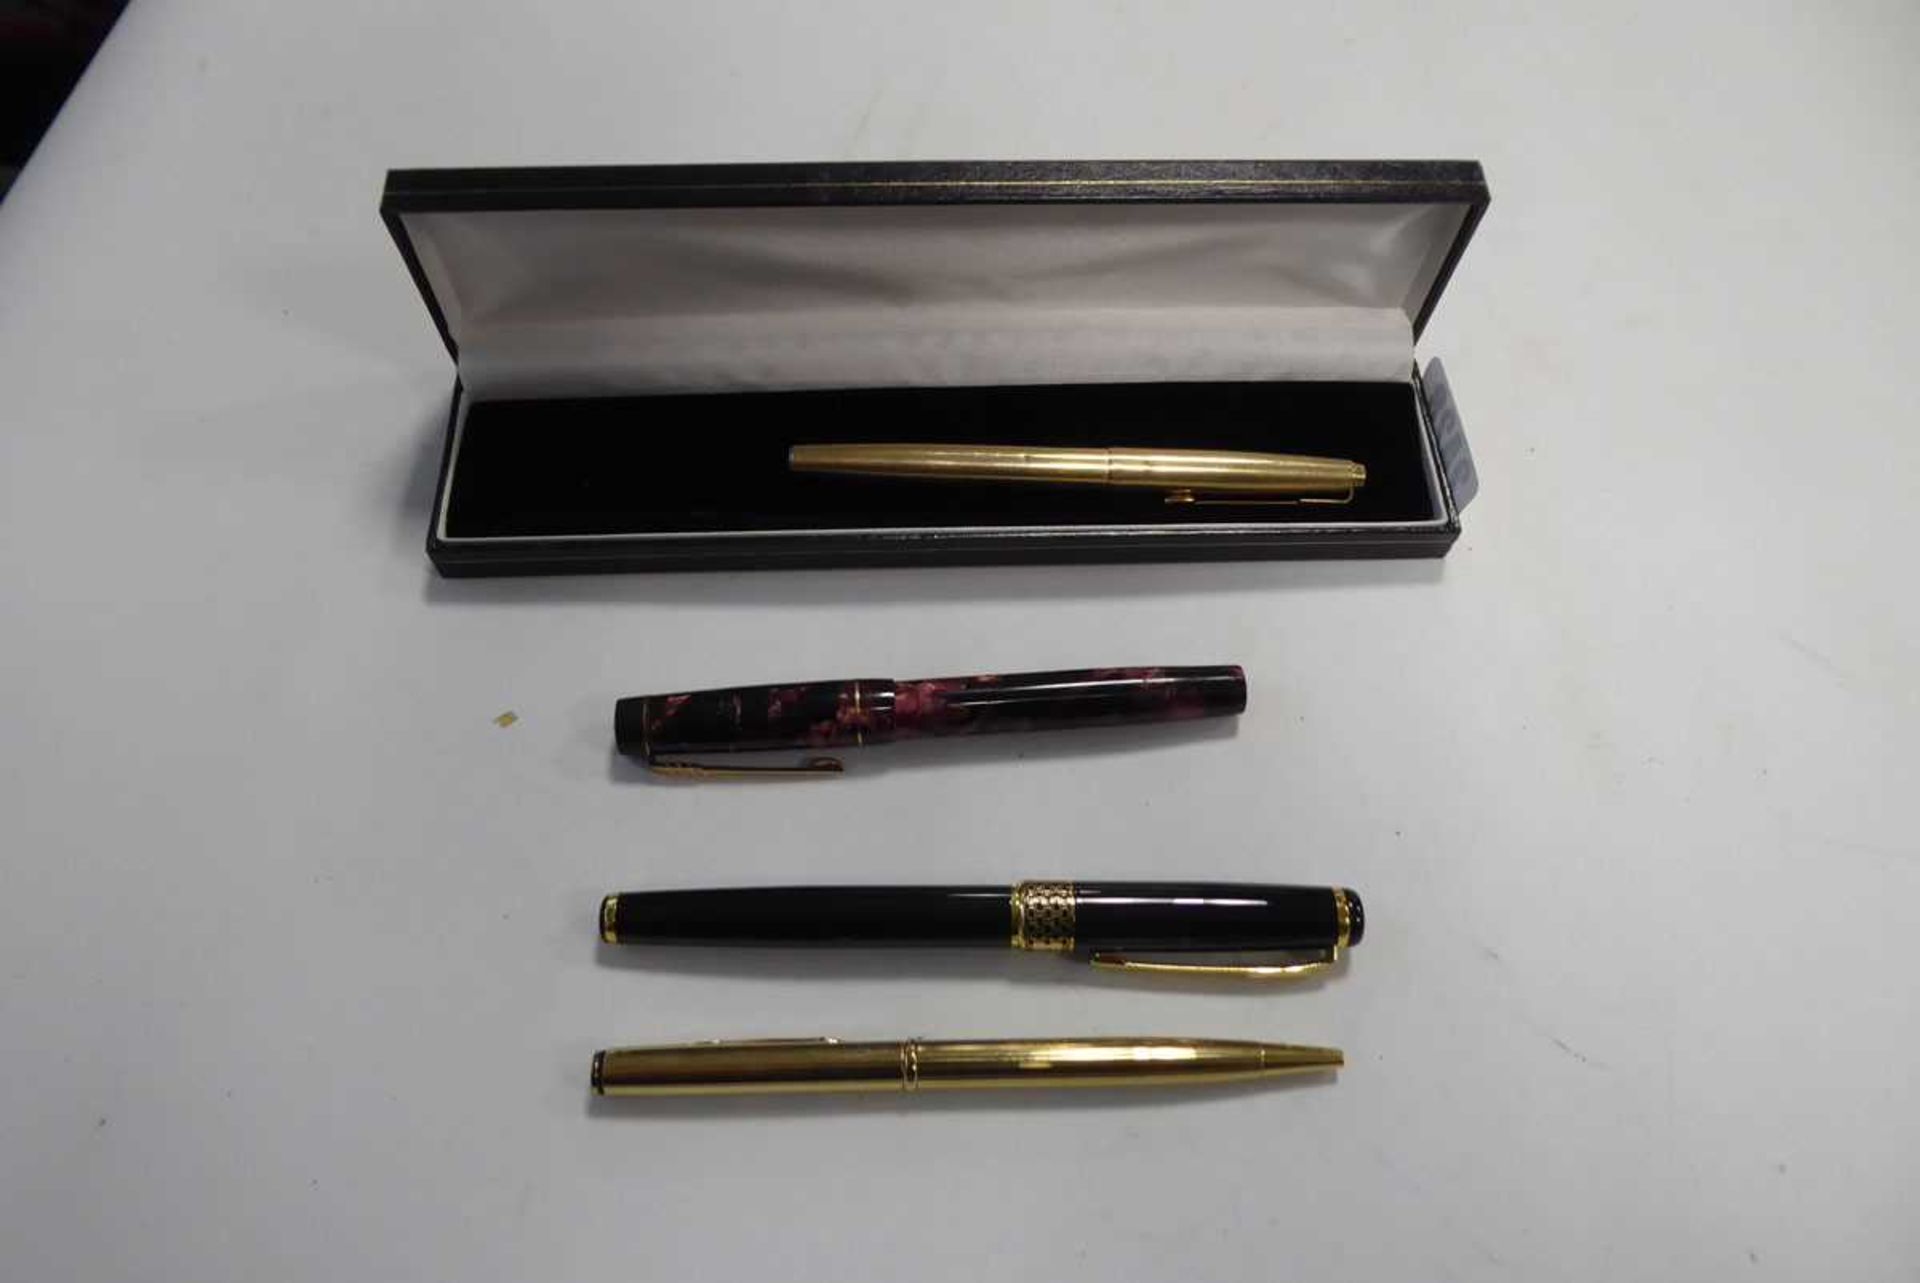 Two Parker pens and two other pens